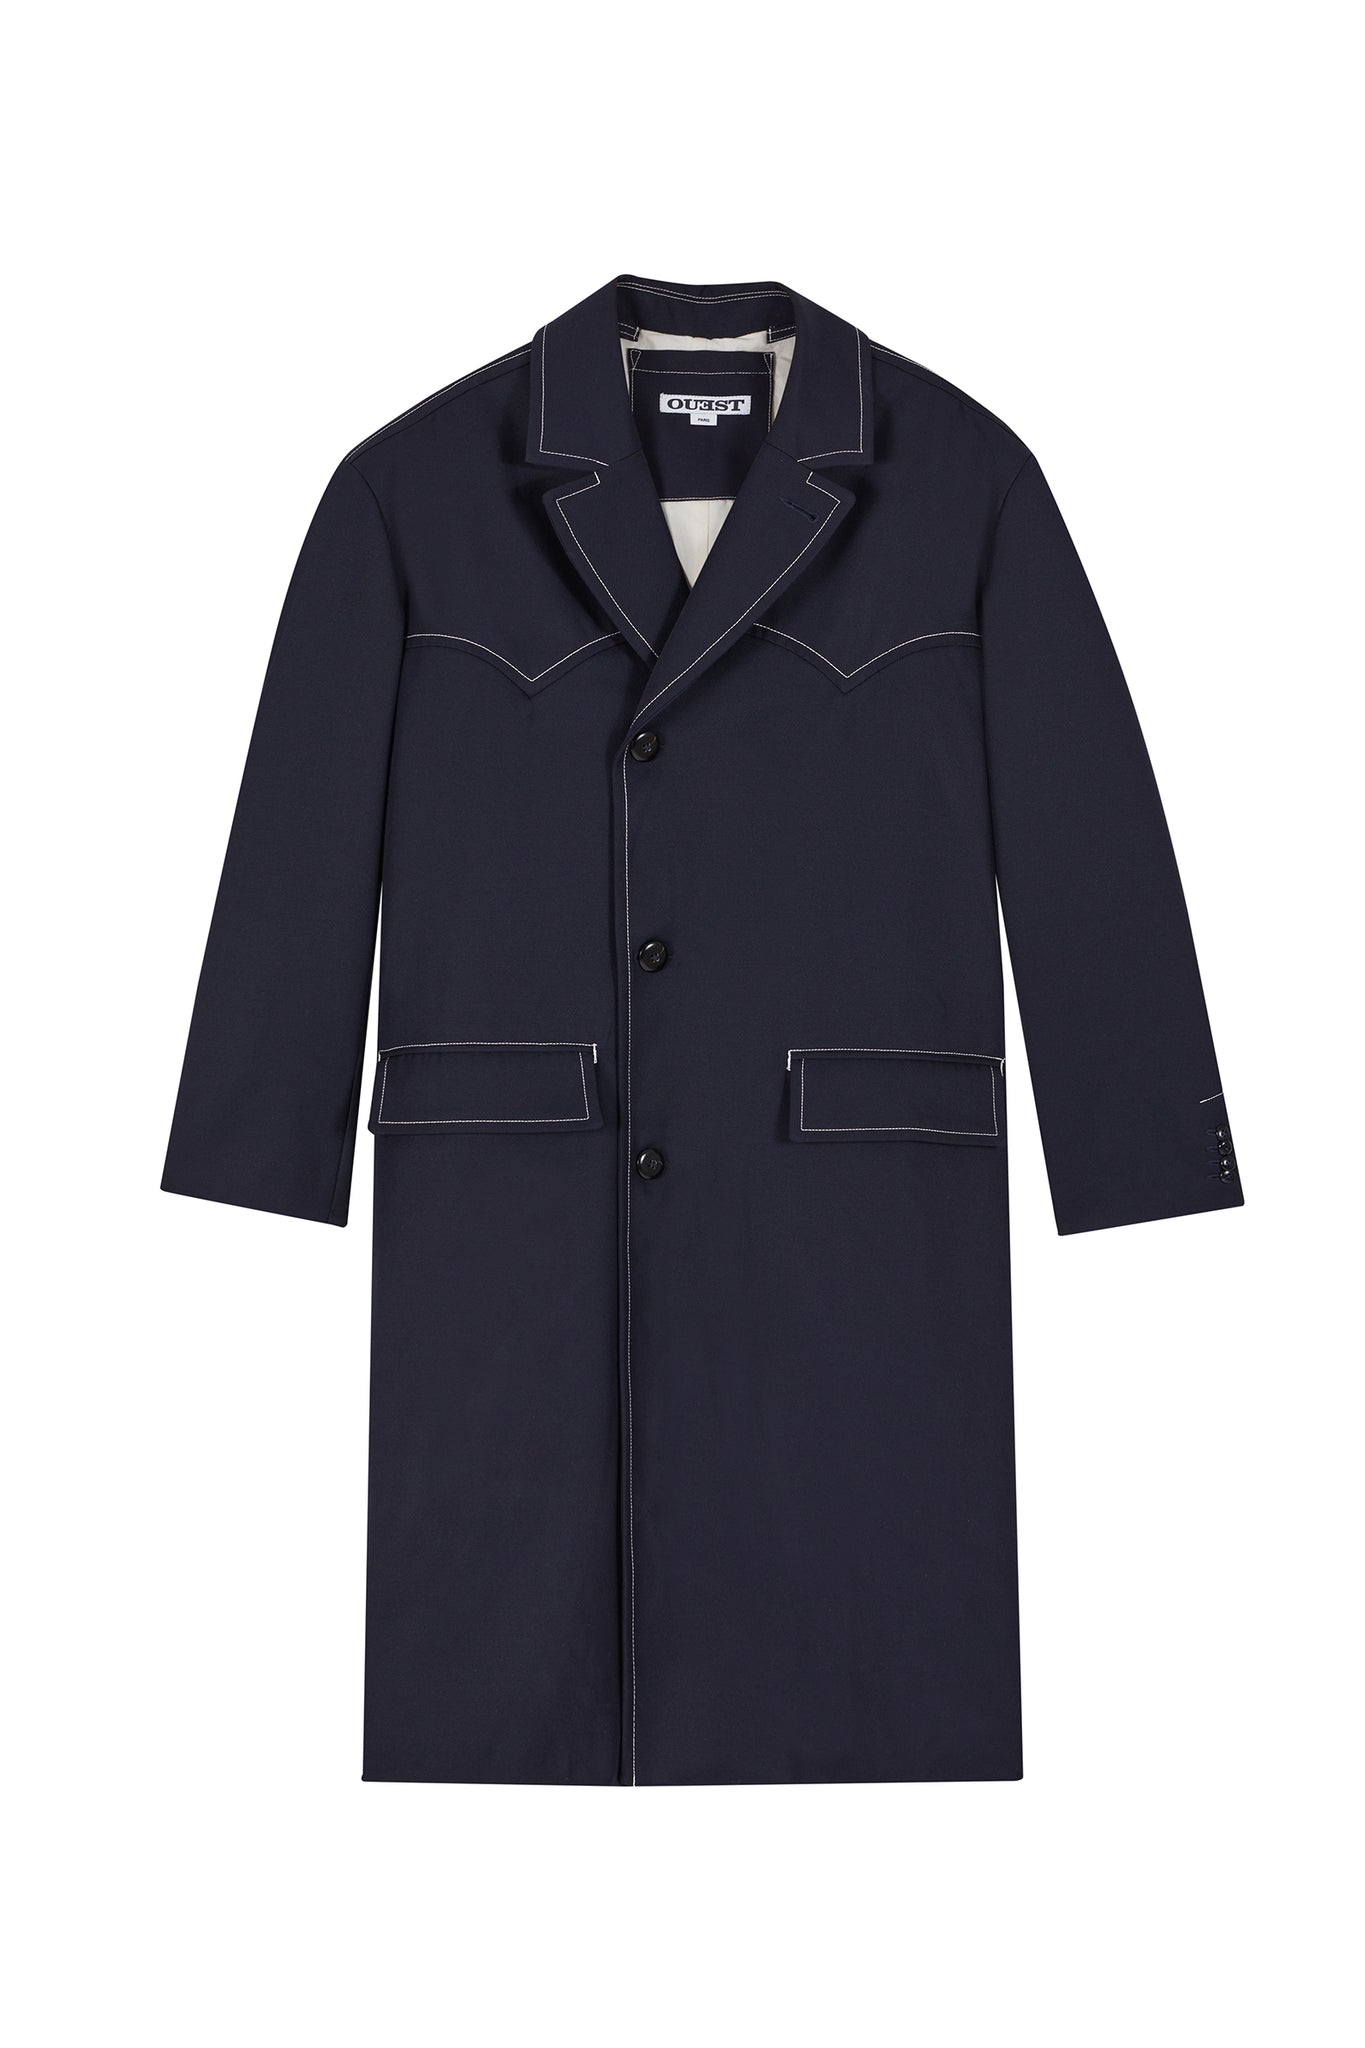 THE WESTERN TAILORED COAT IN NAVY